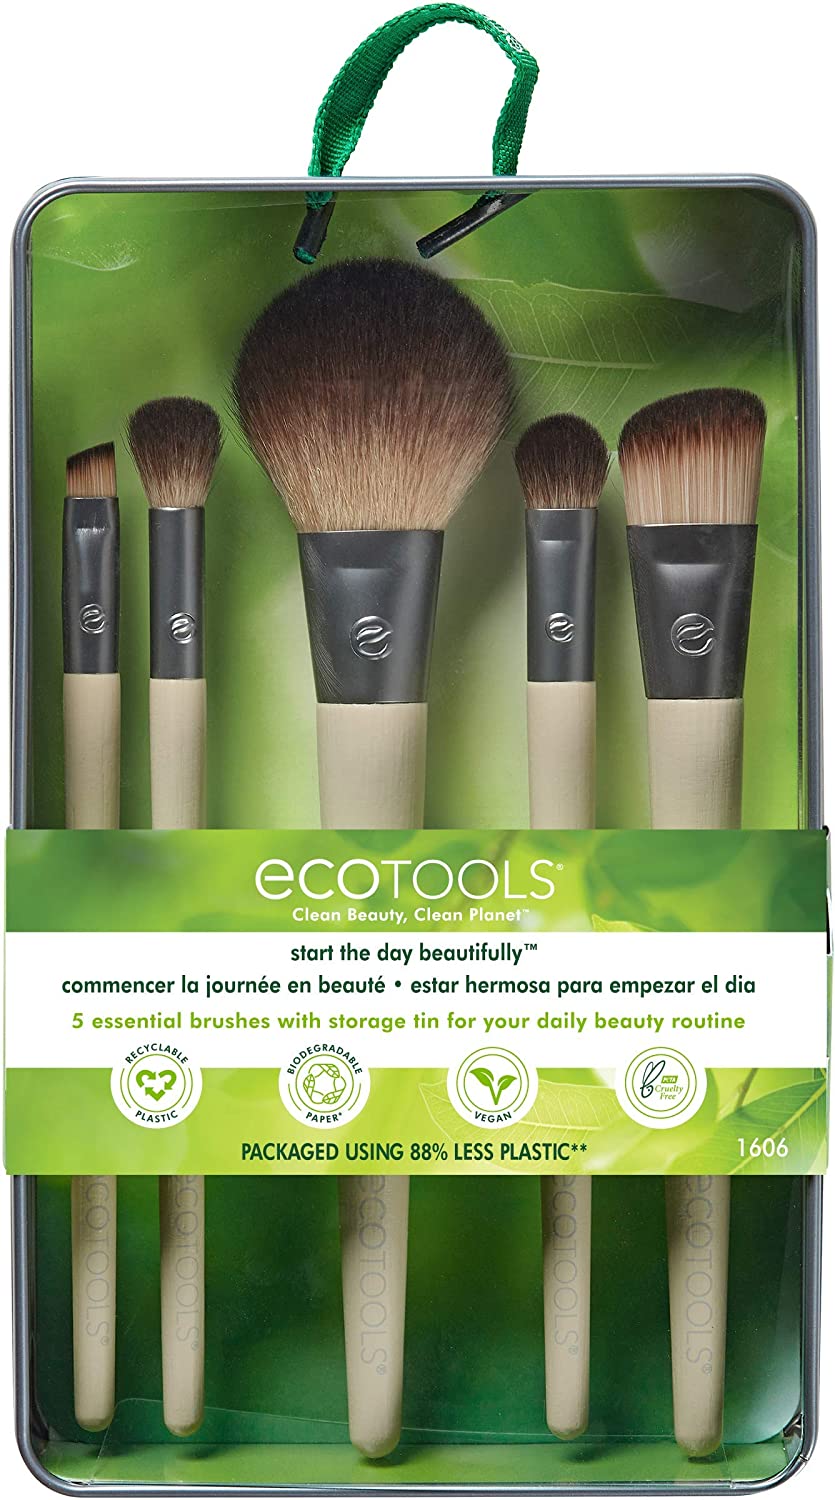 5-Pc EcoTools Start The Day Beautifully Makeup Brush Set $4.60 + Free Shipping w/ Amazon Prime or Orders $25+